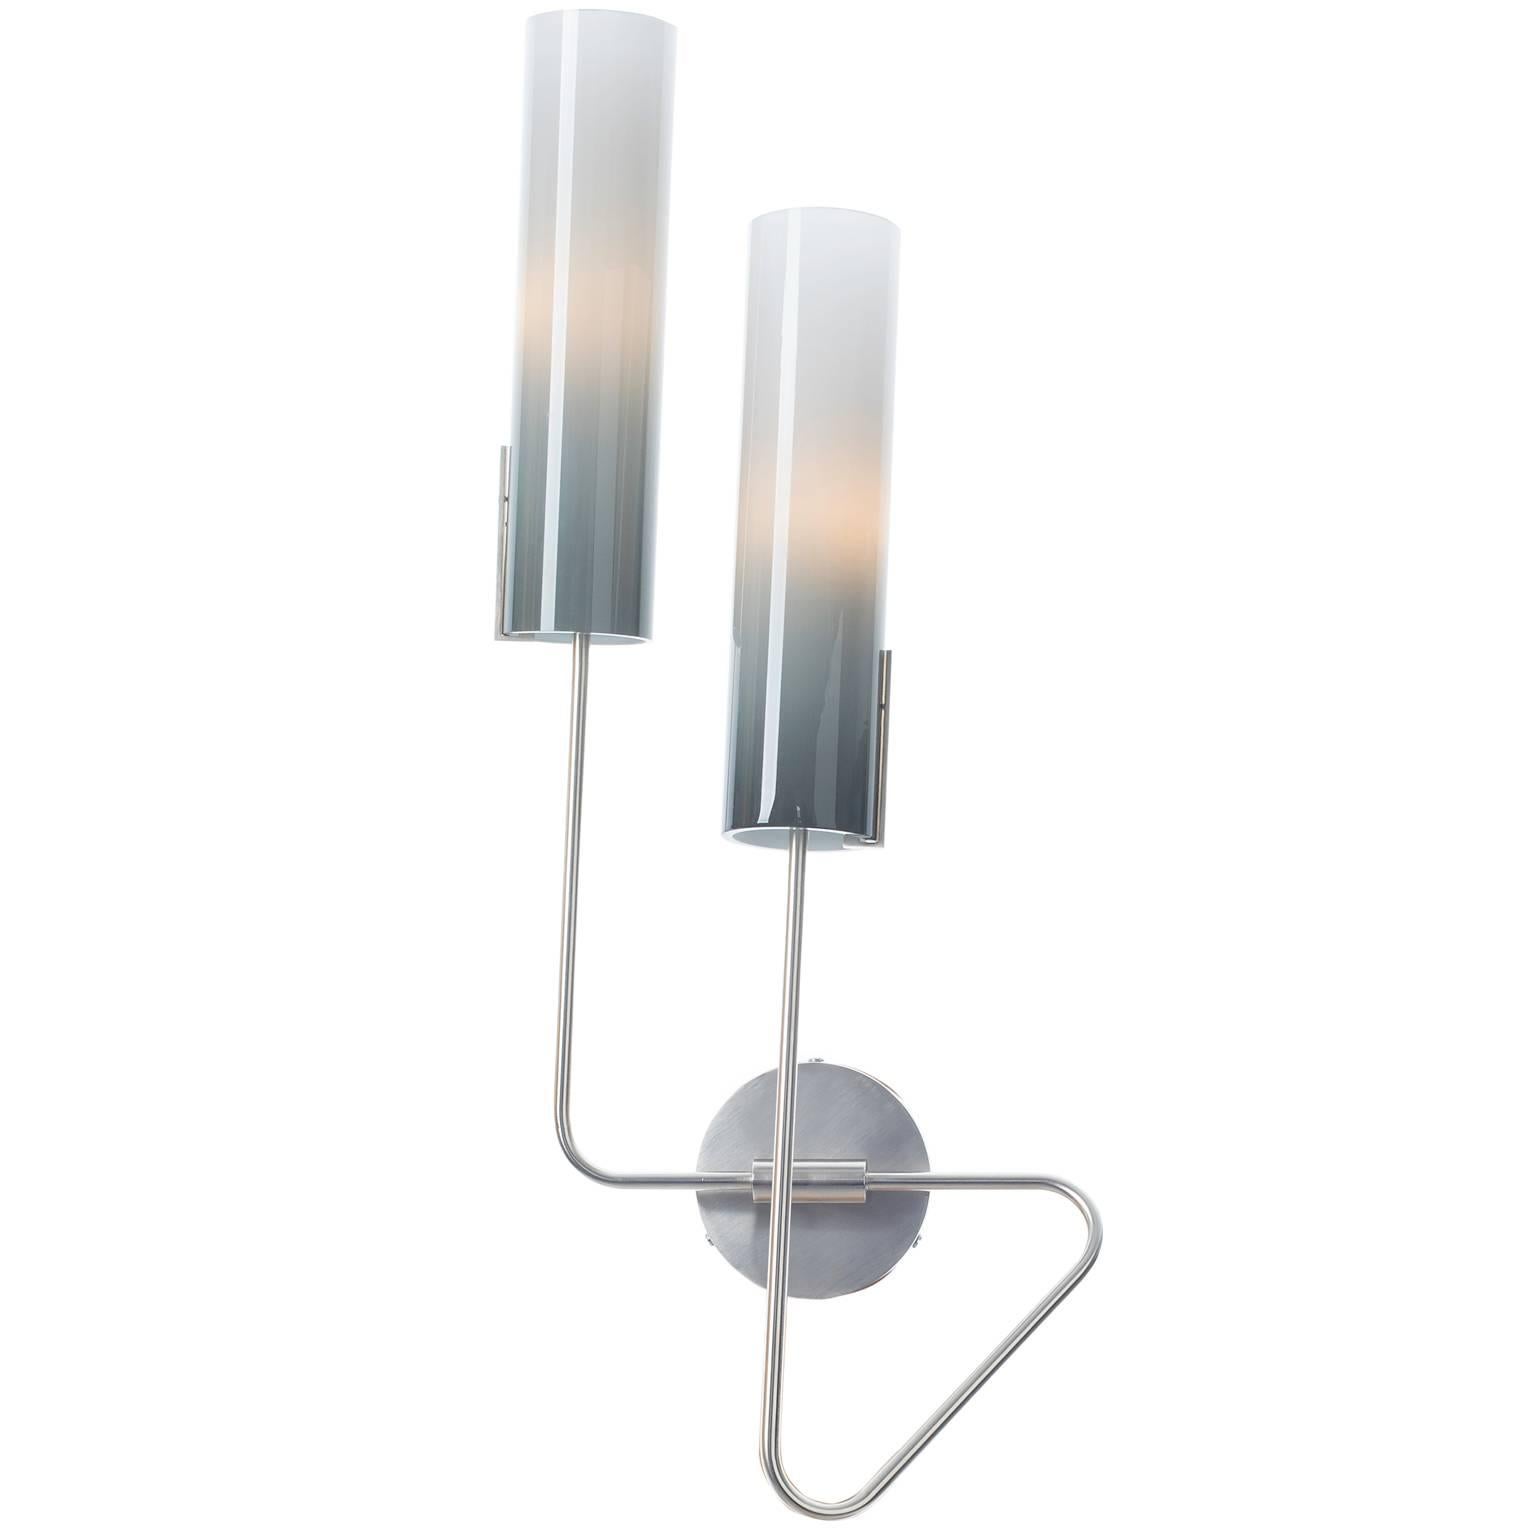 The Continuum collection comprises five sconce models and multiple large scale chandeliers. Sconces are available handed for symmetrical installations.  Hand blown glass shades are made to order in Brooklyn.

Glass Shades: hand blown glass in solid